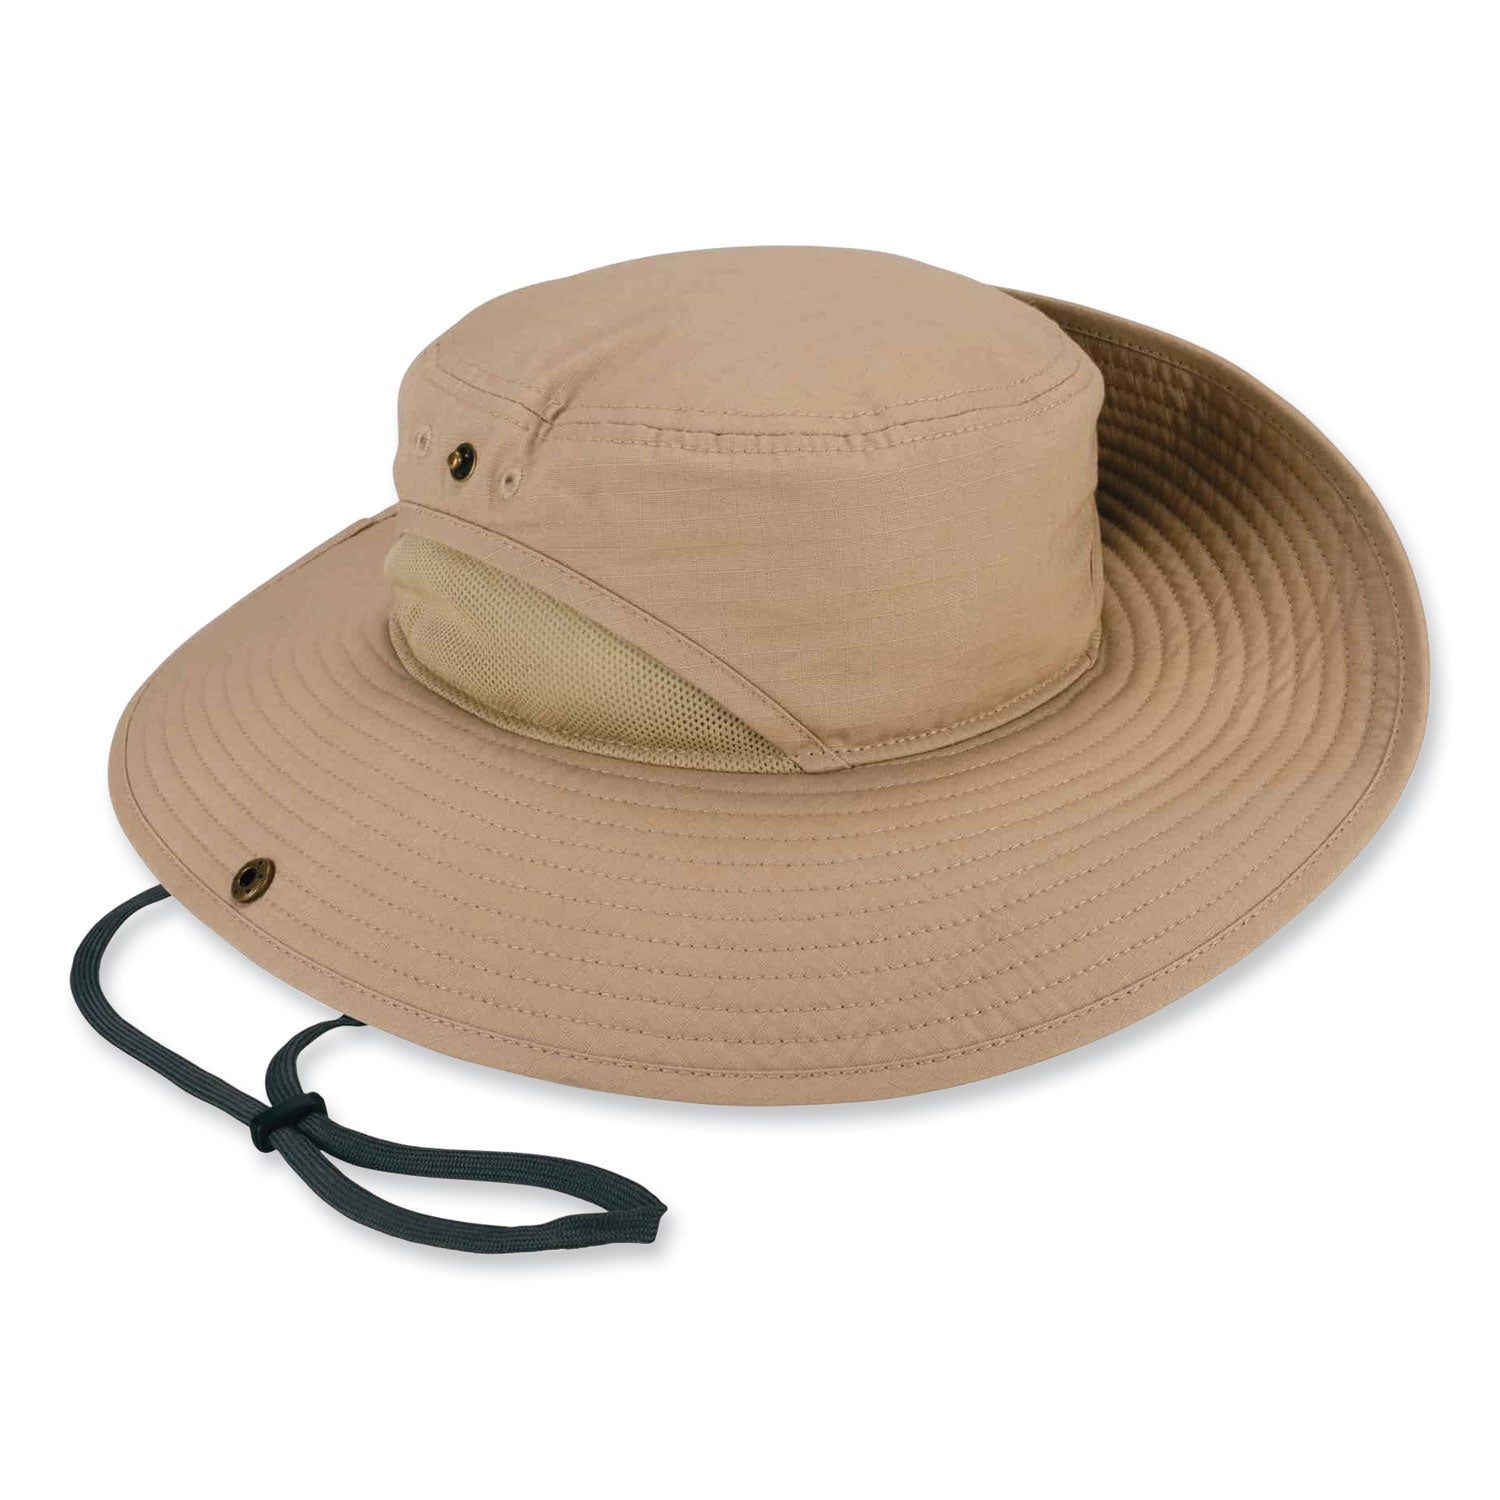 chill-its-8936-lightweight-mesh-paneling-ranger-hat-large-x-large-khaki-ships-in-1-3-business-days_ego12599 - 1